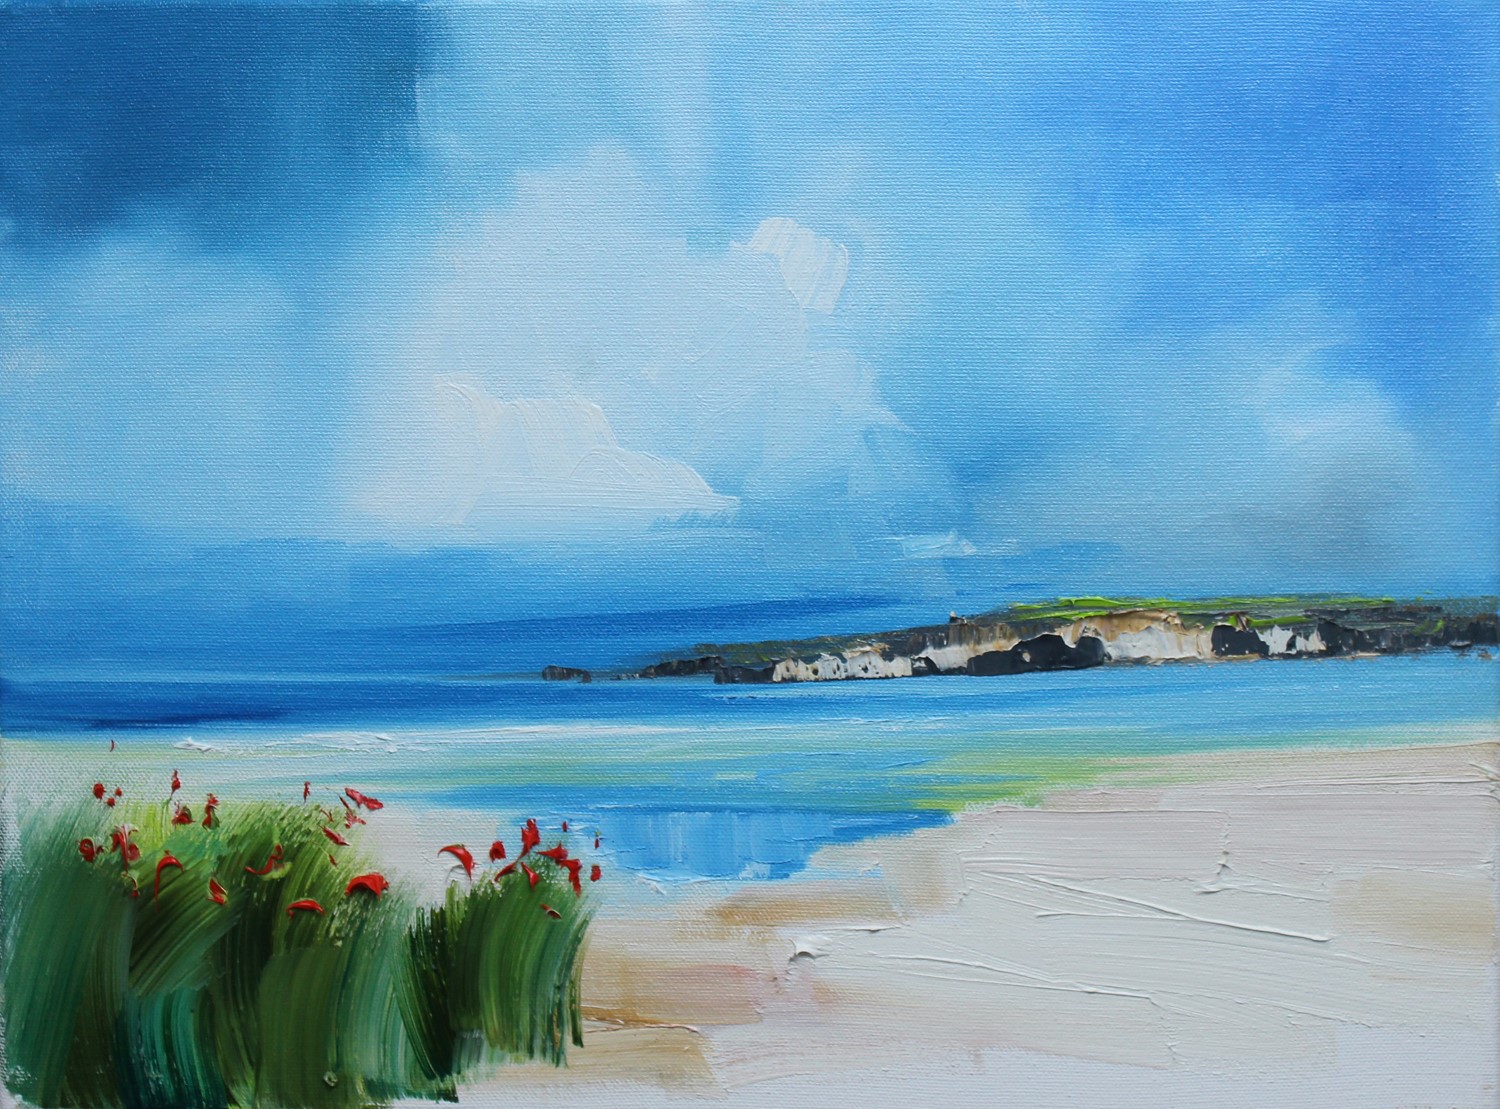 'Flowering poppies on sandy shores' by artist Rosanne Barr